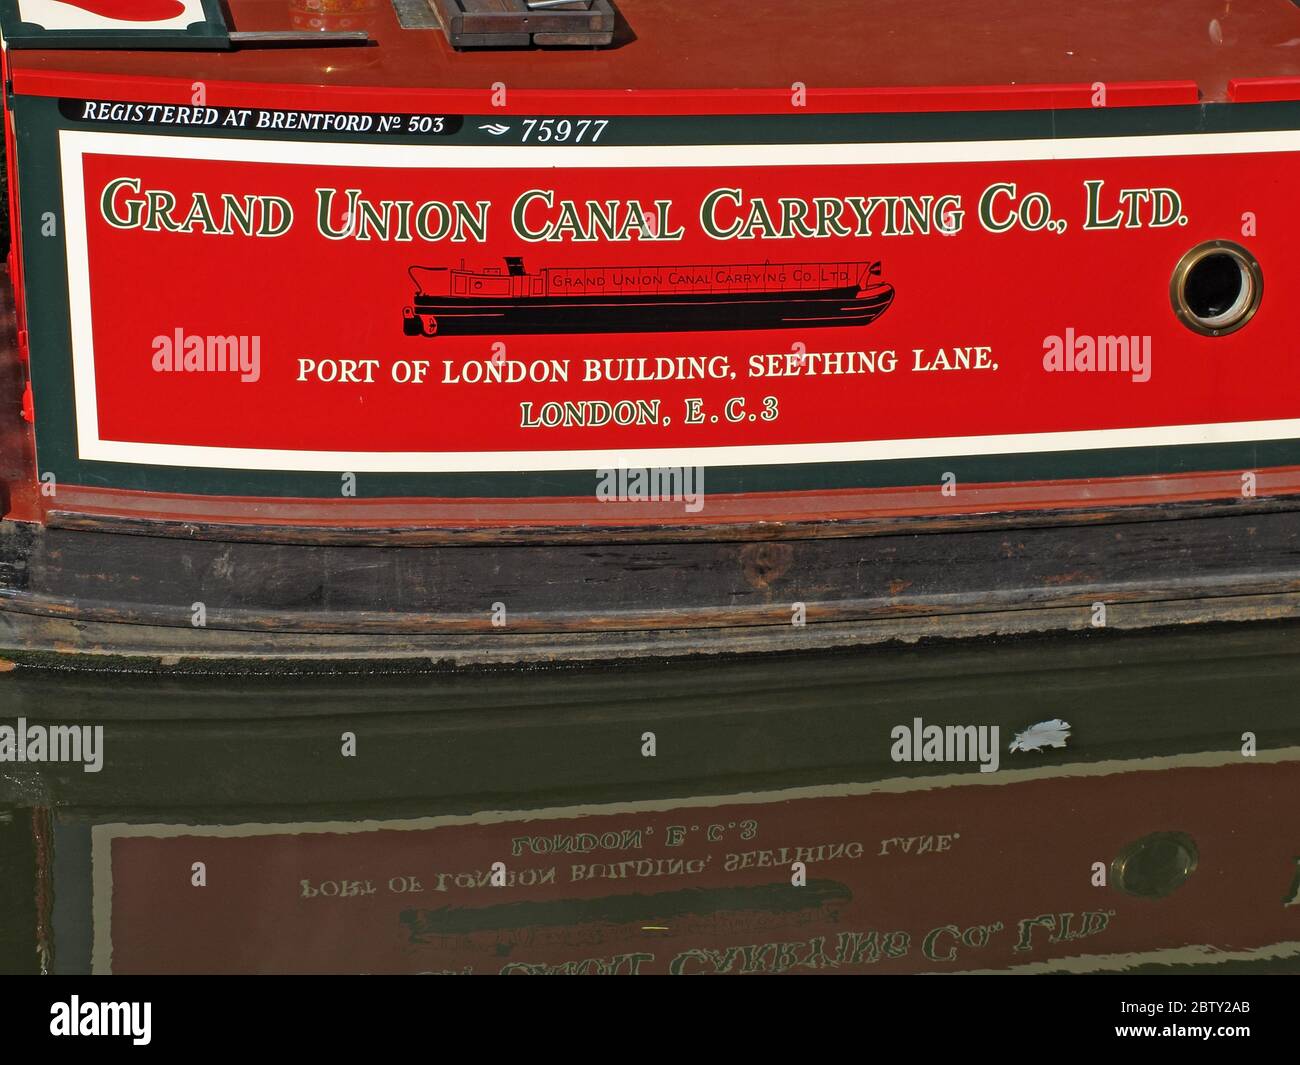 Pavo no 327,Barge rouge,Grand Union Canal Caring Co Ltd,immatriculée à Brentford no 503,75977,Port of London Building,Seething Lane,EC3 Banque D'Images